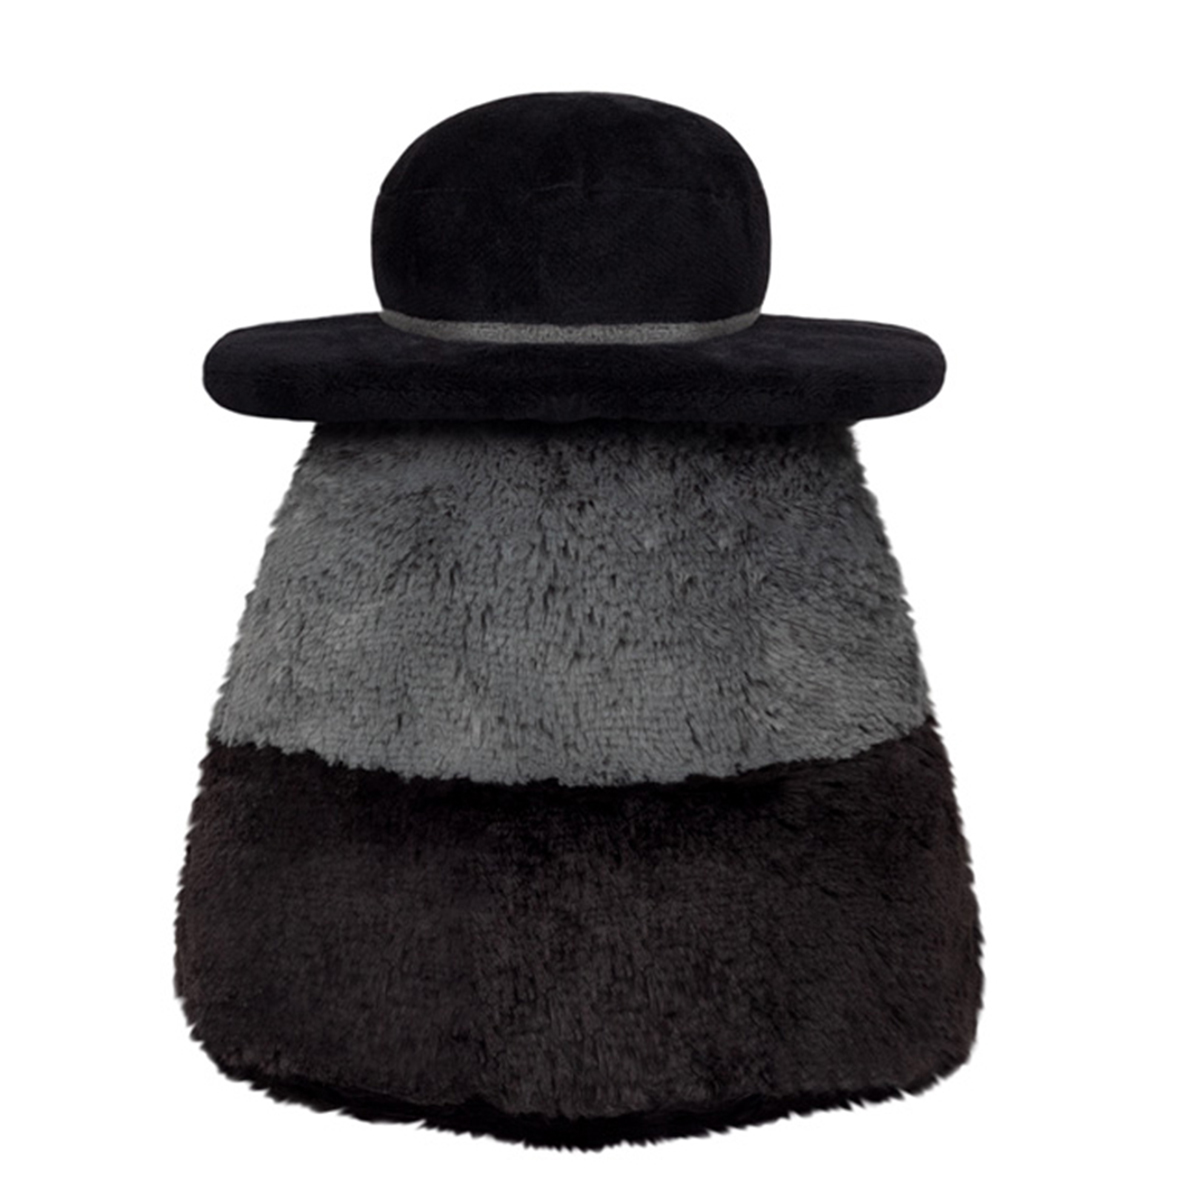 Squishable(R) 7in. Mini Plague Doctor